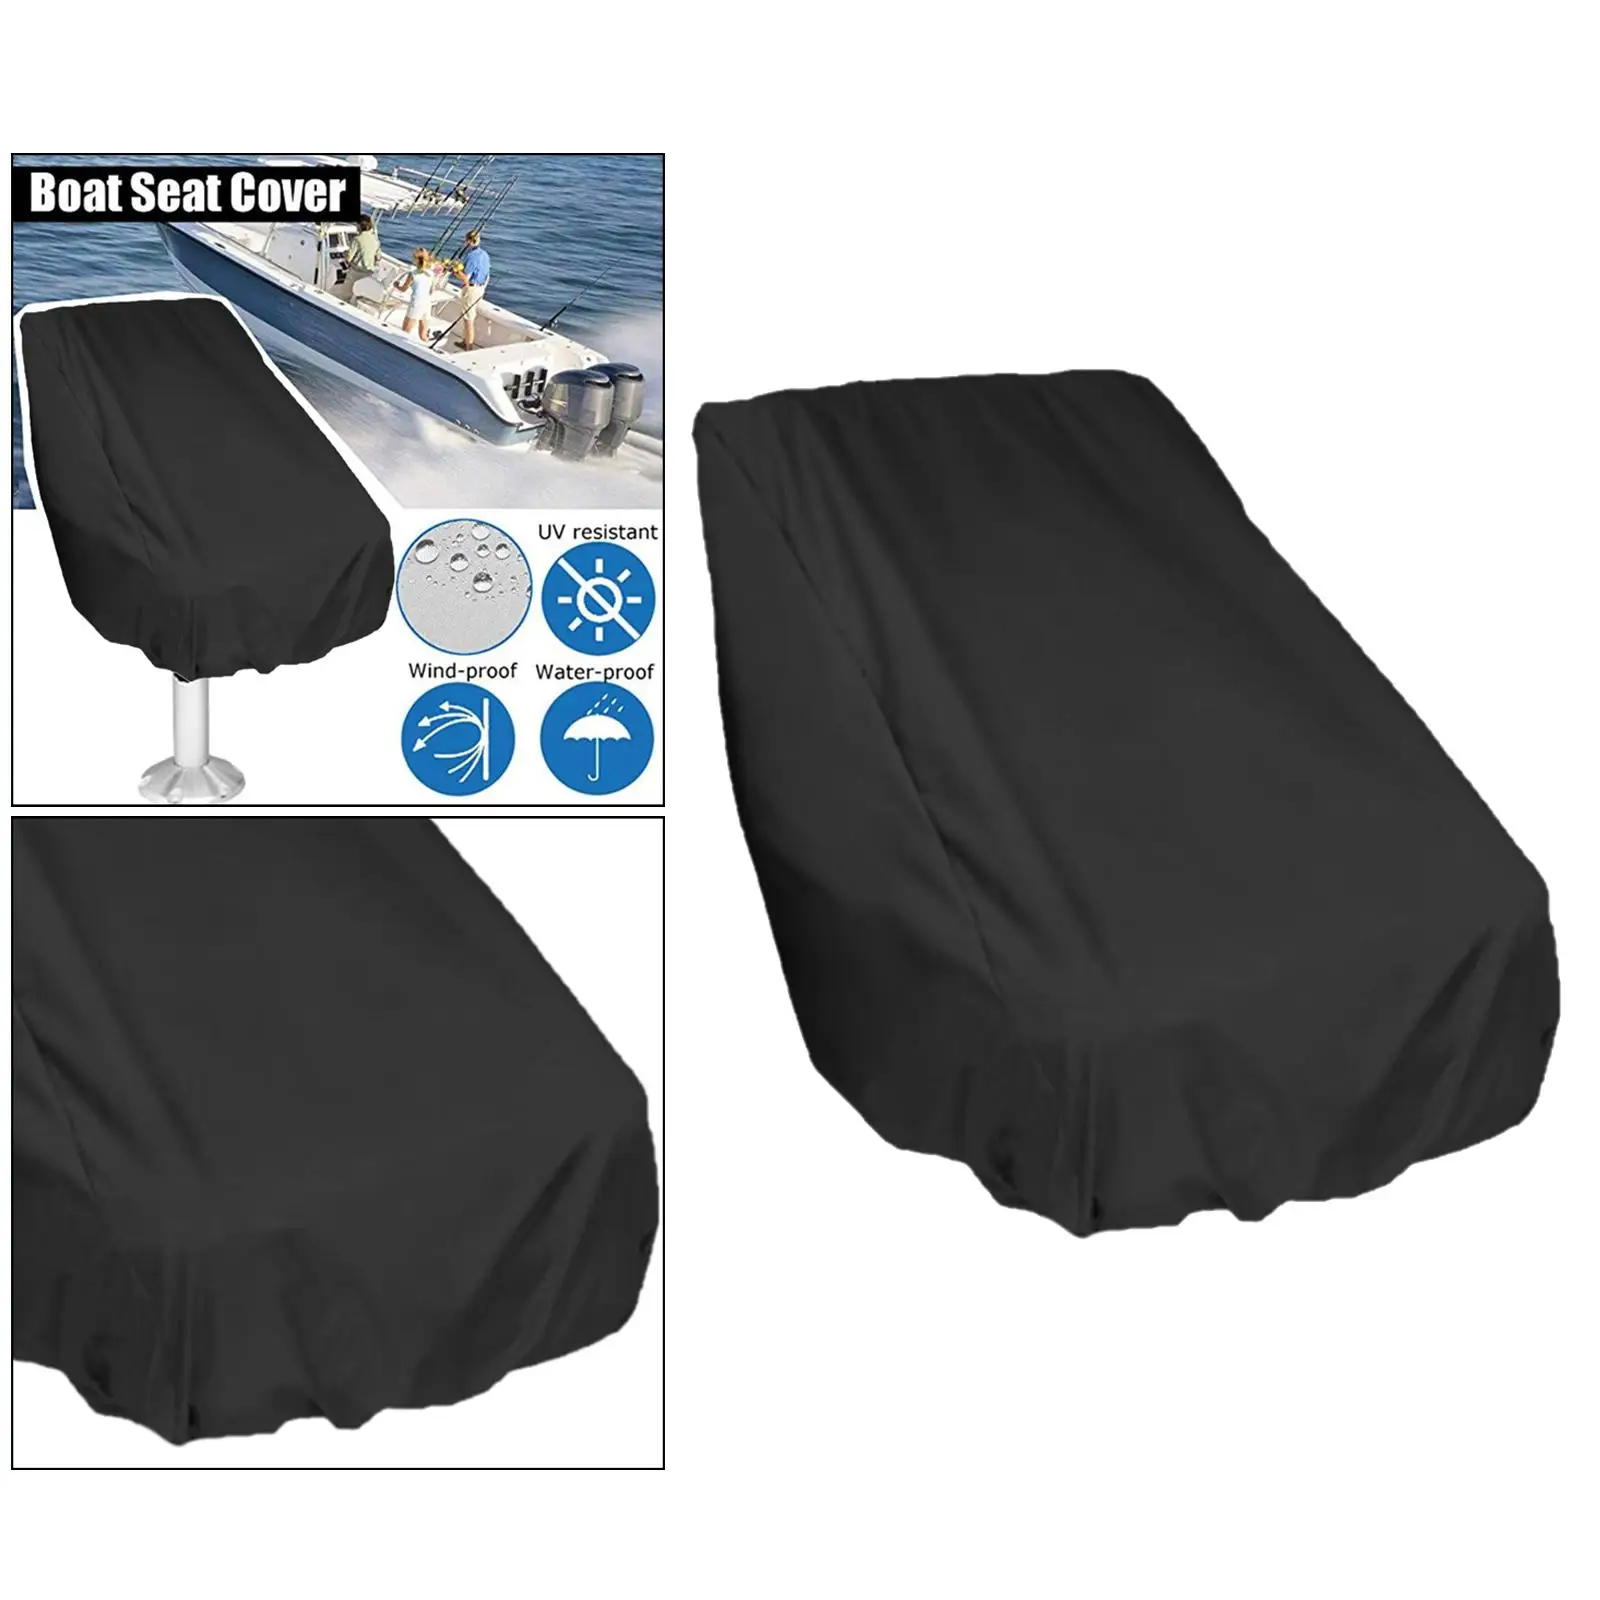 Oxford Fabric Boat Seat Cover, Foldable 210D Boat Seat Cover, Fits Most Pedestal Seats, 56x61x64cm